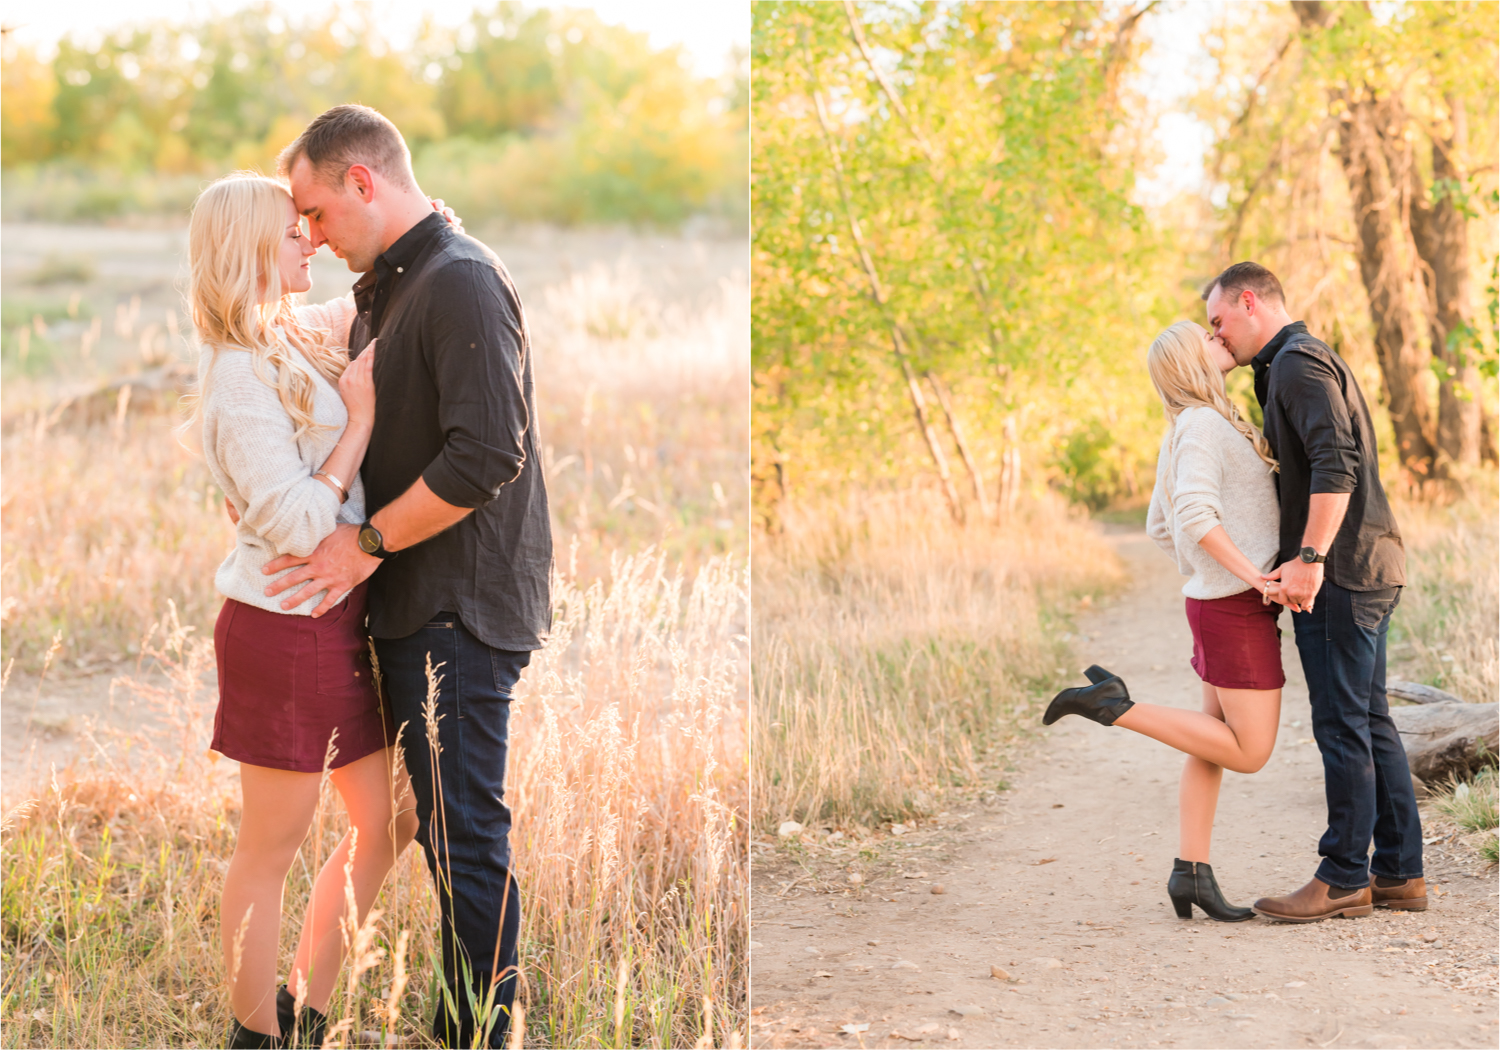 Romantic Fall Farmhouse Engagement at Prospect Ponds River Bend | Britni Girard Photography | Colorado Wedding Photographer and Videography team | Fall Leaves and Romantic Wine stroll in Fort Collins